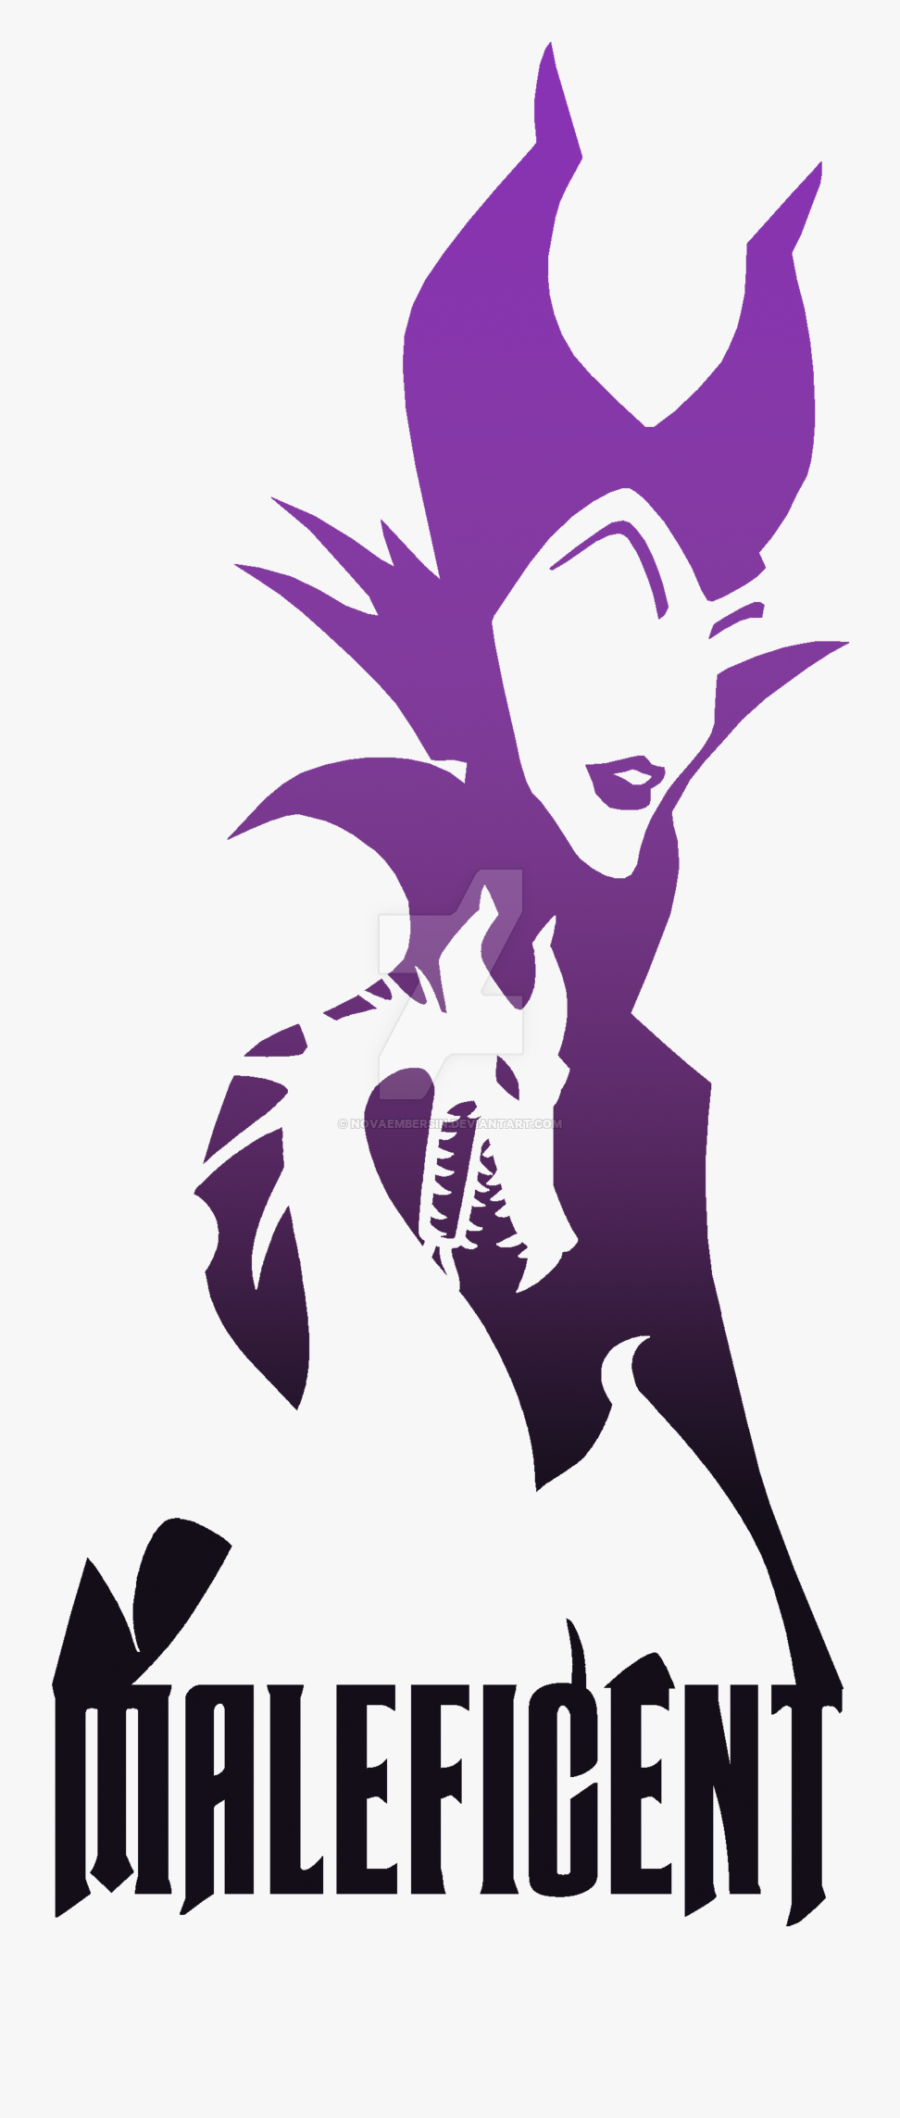 Download Maleficent Silhouette Png - Free Disney Villains Svg ...